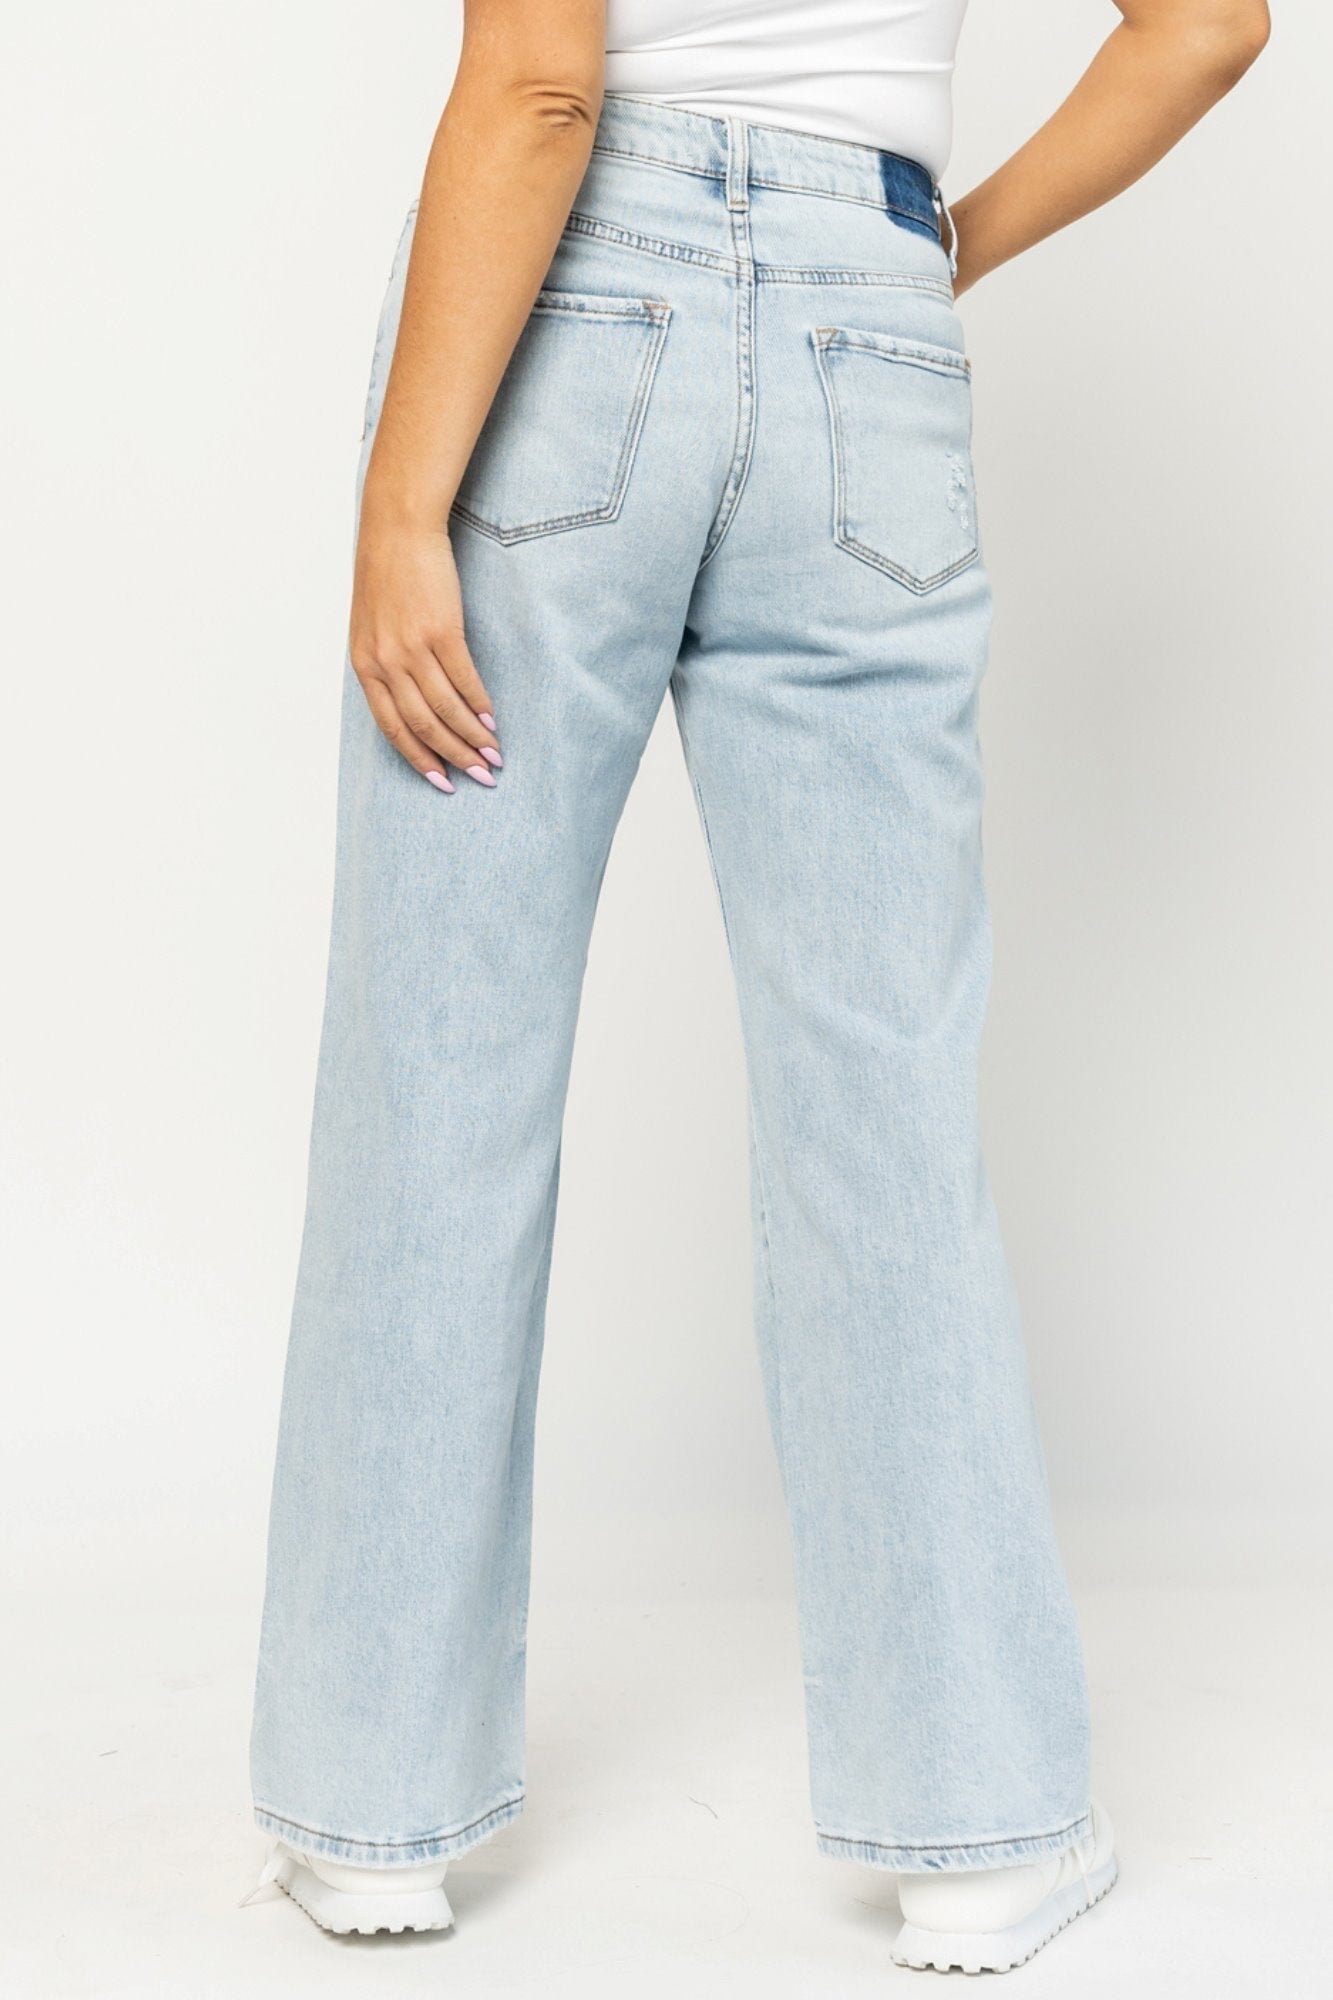 Memphis Jeans Holley Girl 